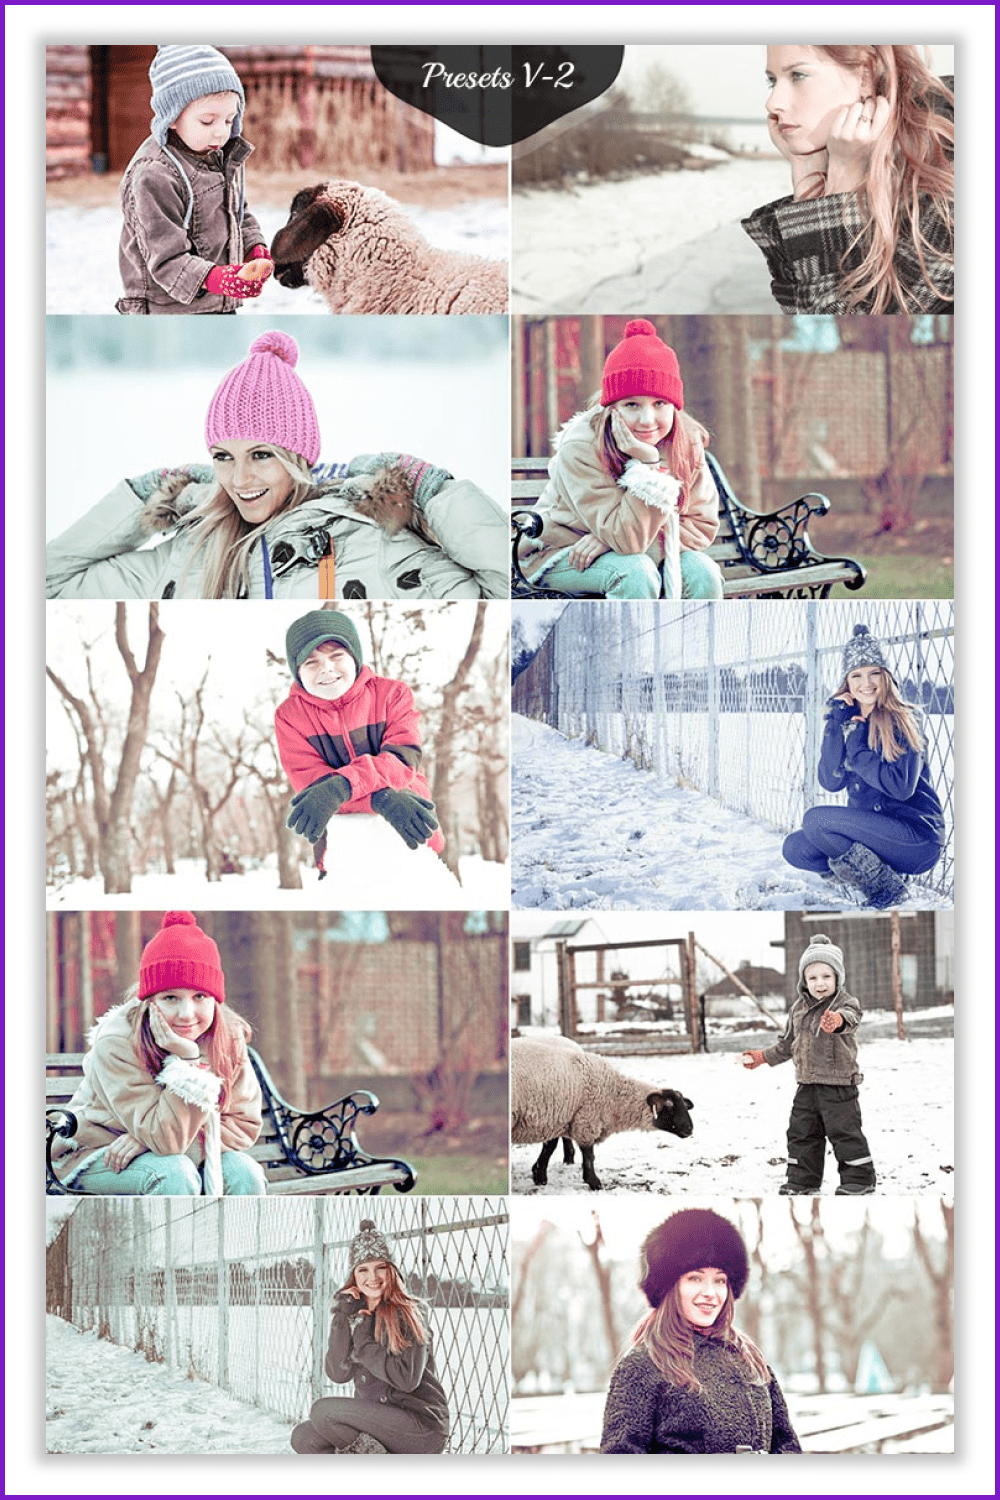 Collage of photos of people in winter.